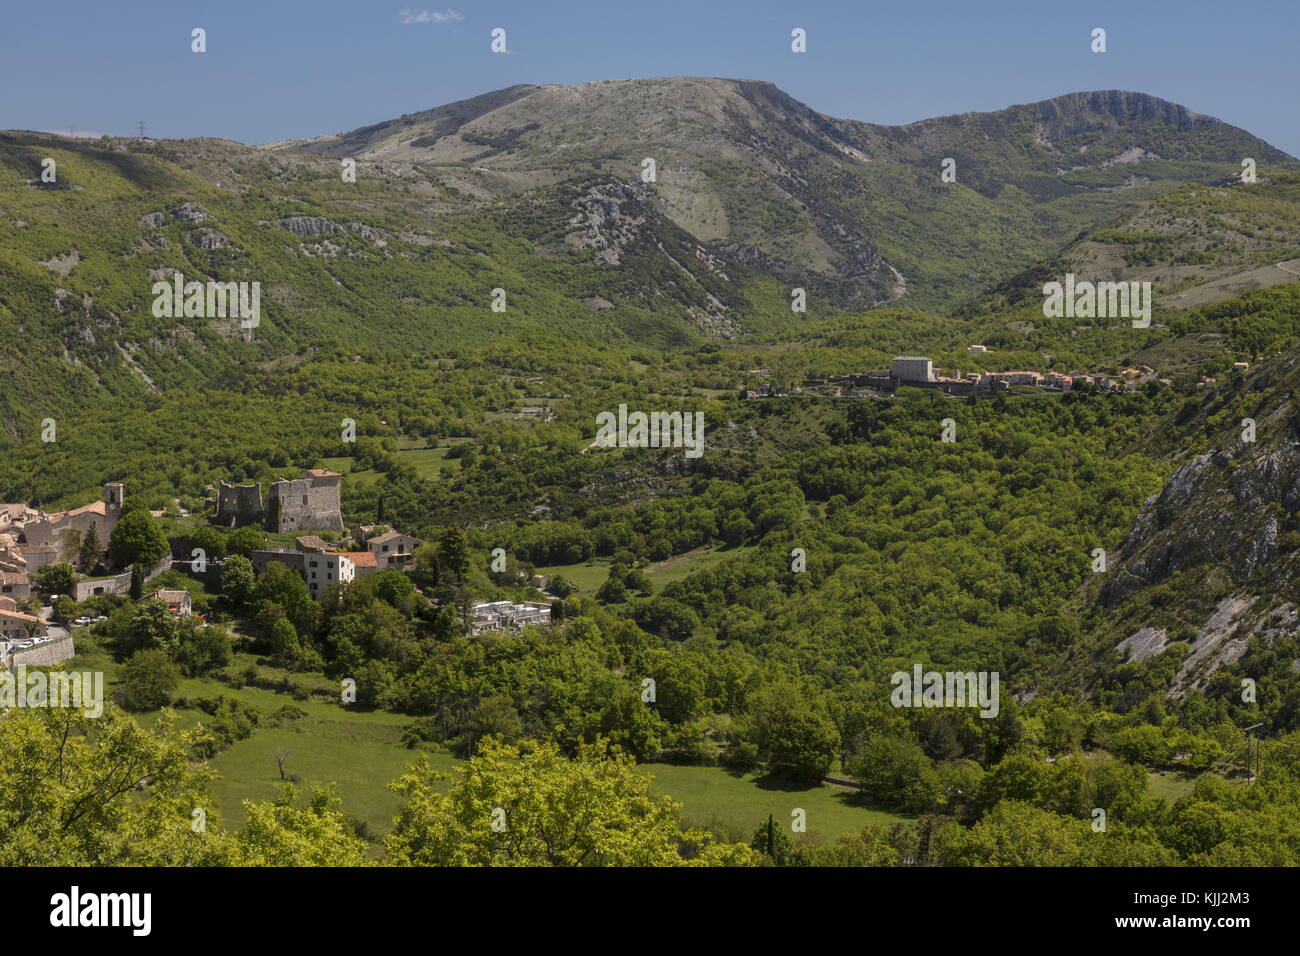 The villages of Gréolières and Cipières on limestone in the Monts d'Azur, Upper Provence, France, Stock Photo